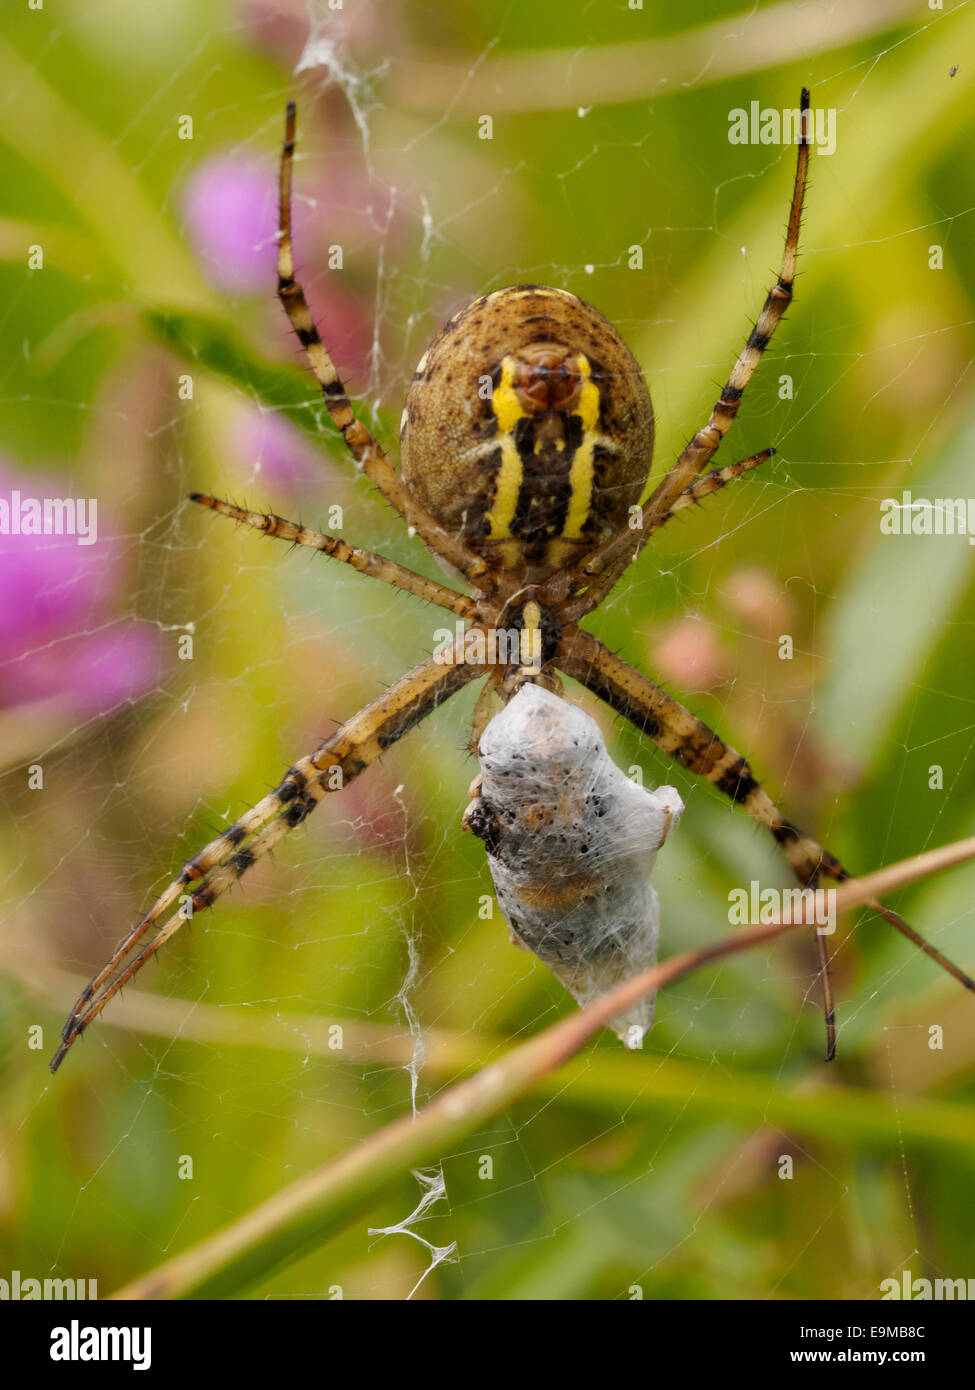 Face on macro shot of a large striped spider with captured prey Stock Photo